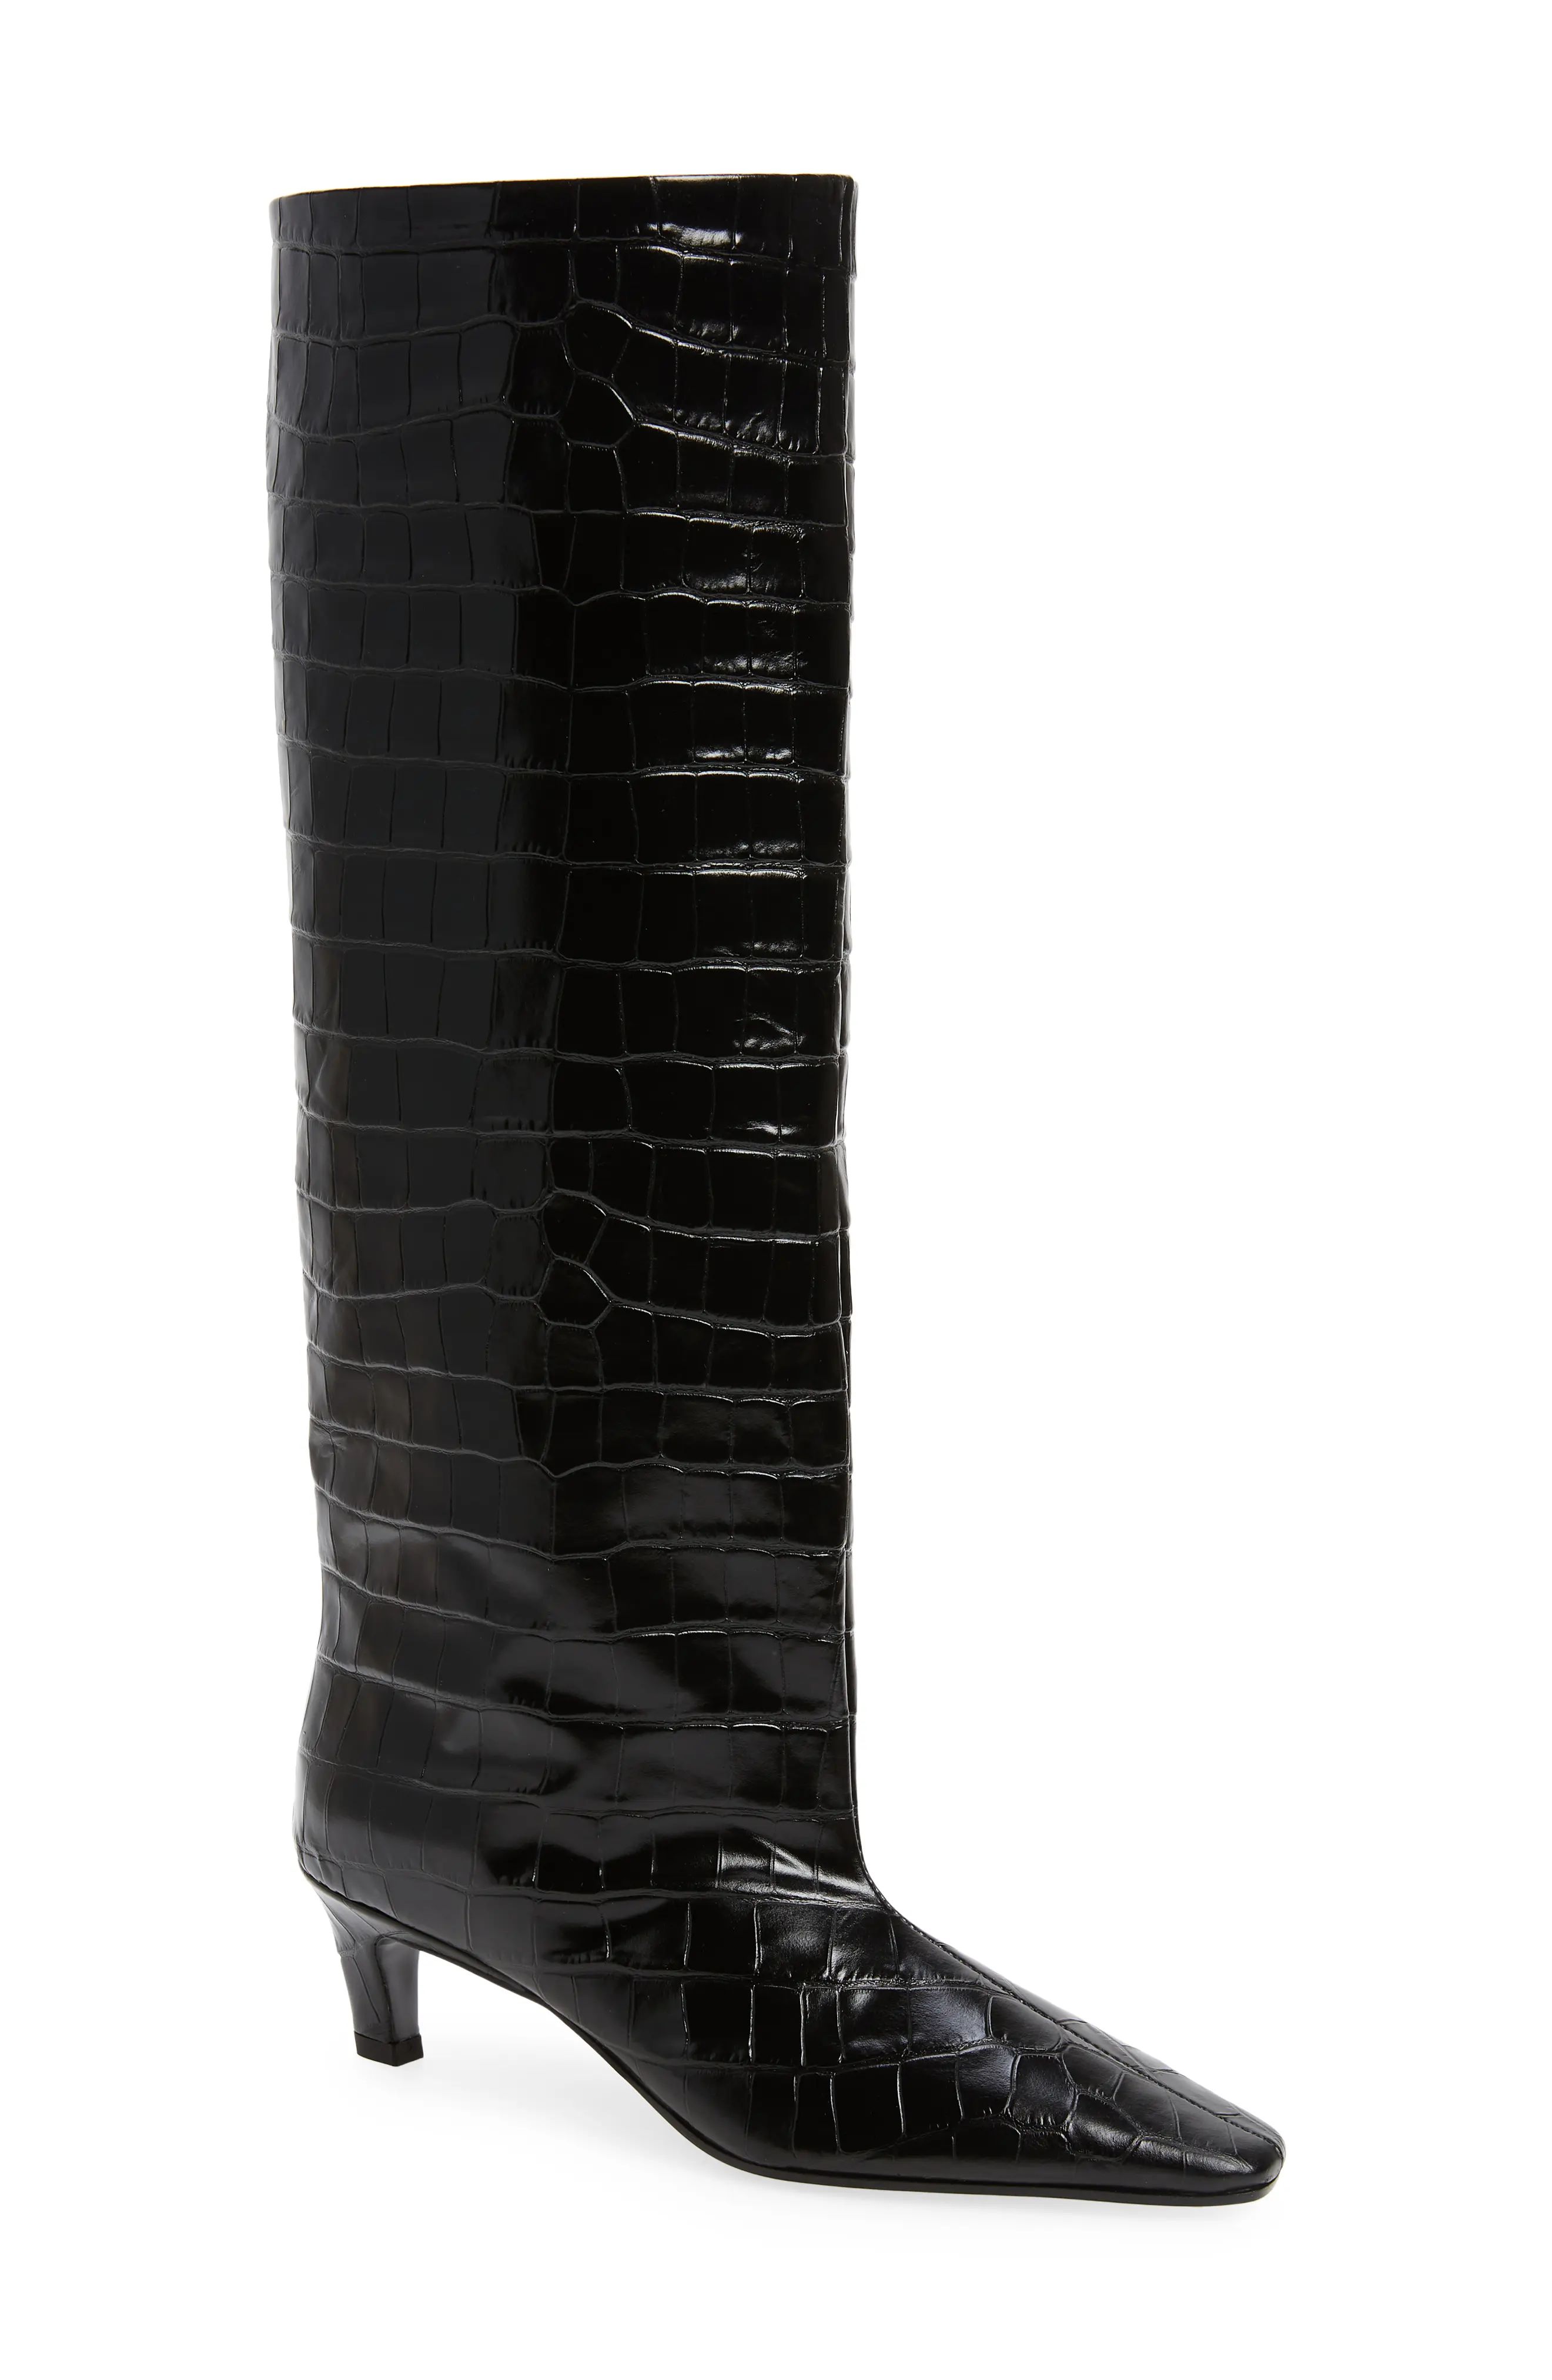 Toteme The Wide Shaft Croc Embossed Tall Boot in Black Croco at Nordstrom, Size 9Us | Nordstrom